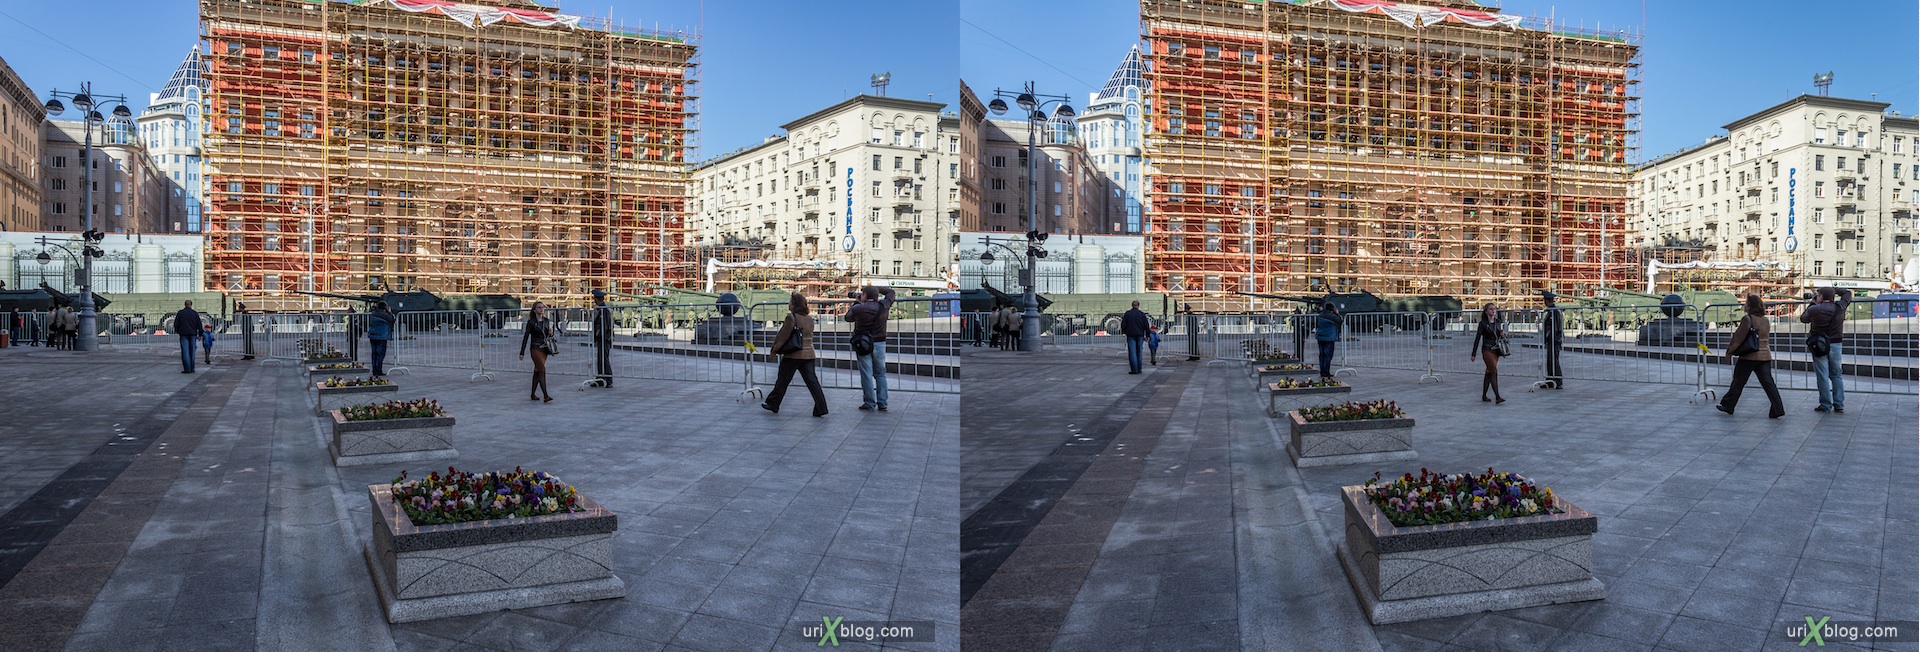 2013, Russia, Moscow, 9 may, parade training, Tverskaya street, preparations, military vehicles, tanks, soldiers, armored troop-carrier, 3D, stereo pair, cross-eyed, crossview, cross view stereo pair, stereoscopic